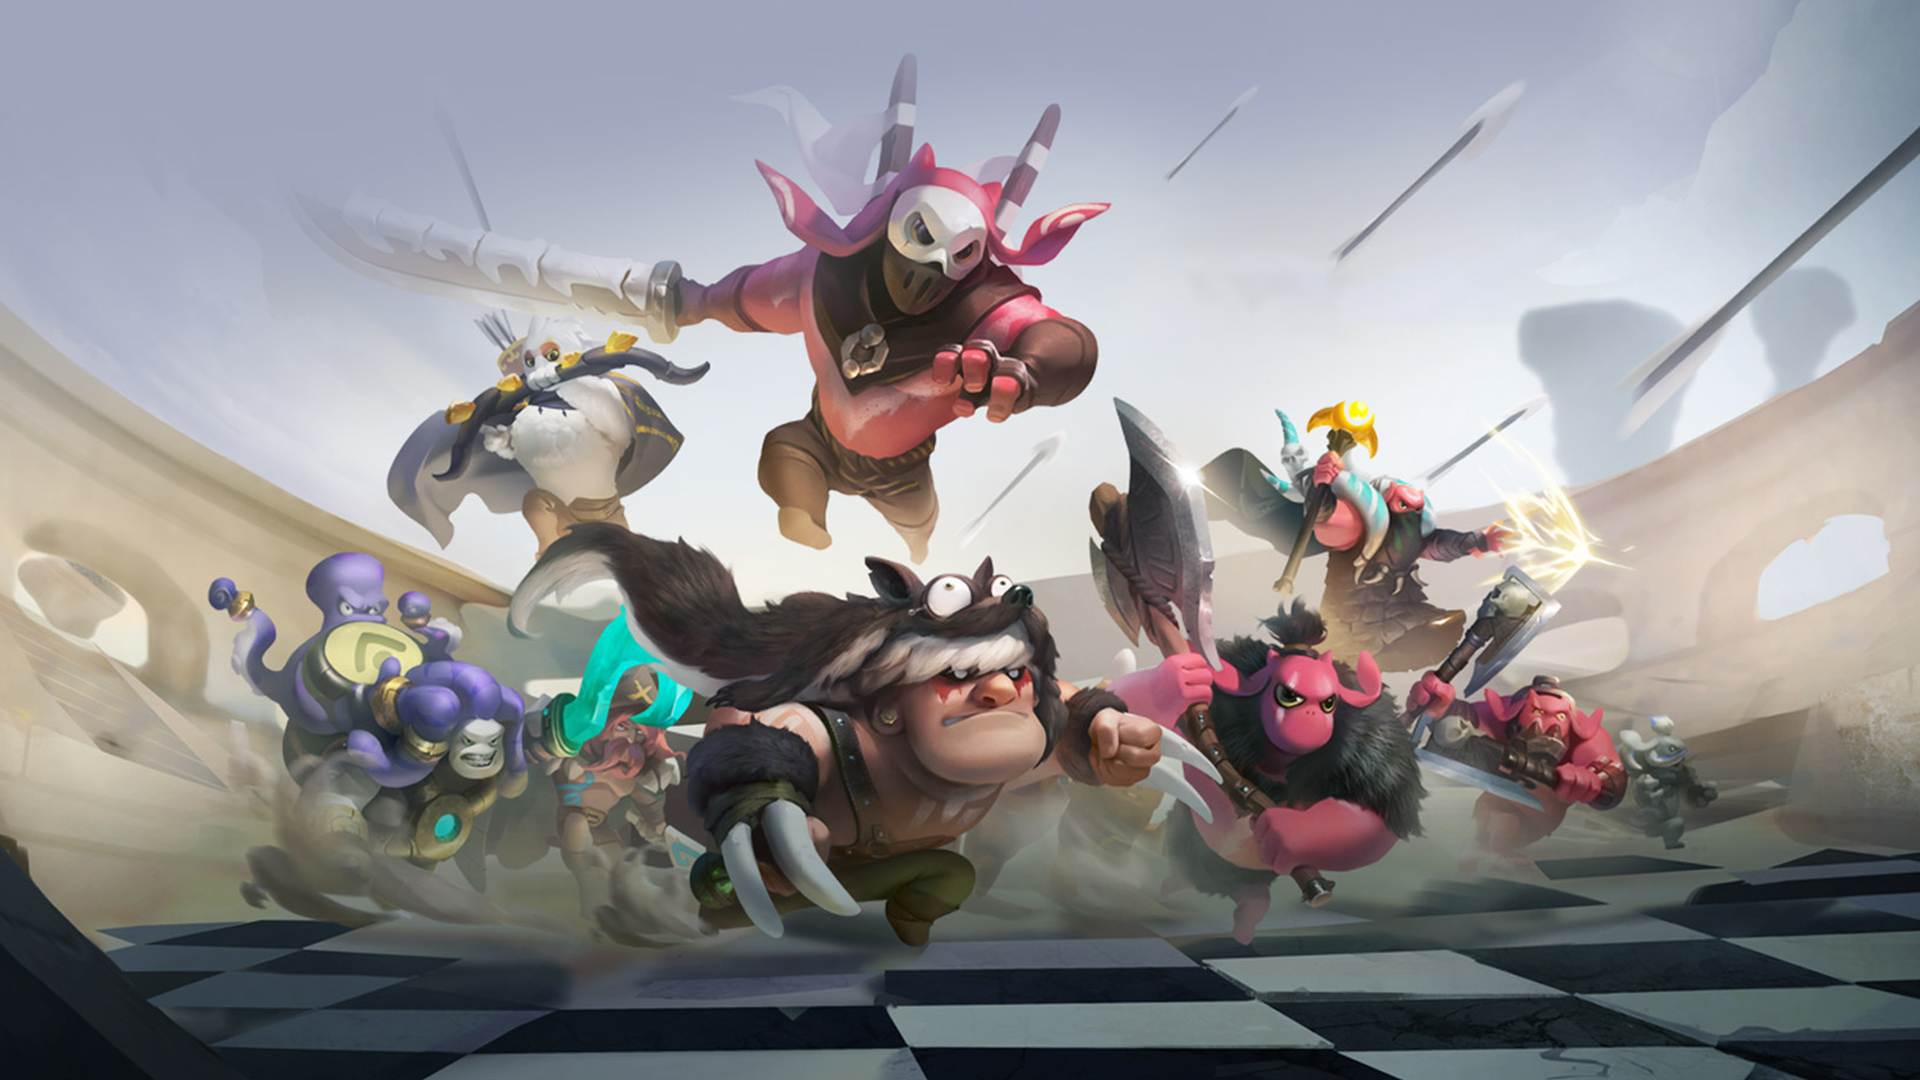 Auto Chess' is coming to PS5 with haptic feedback